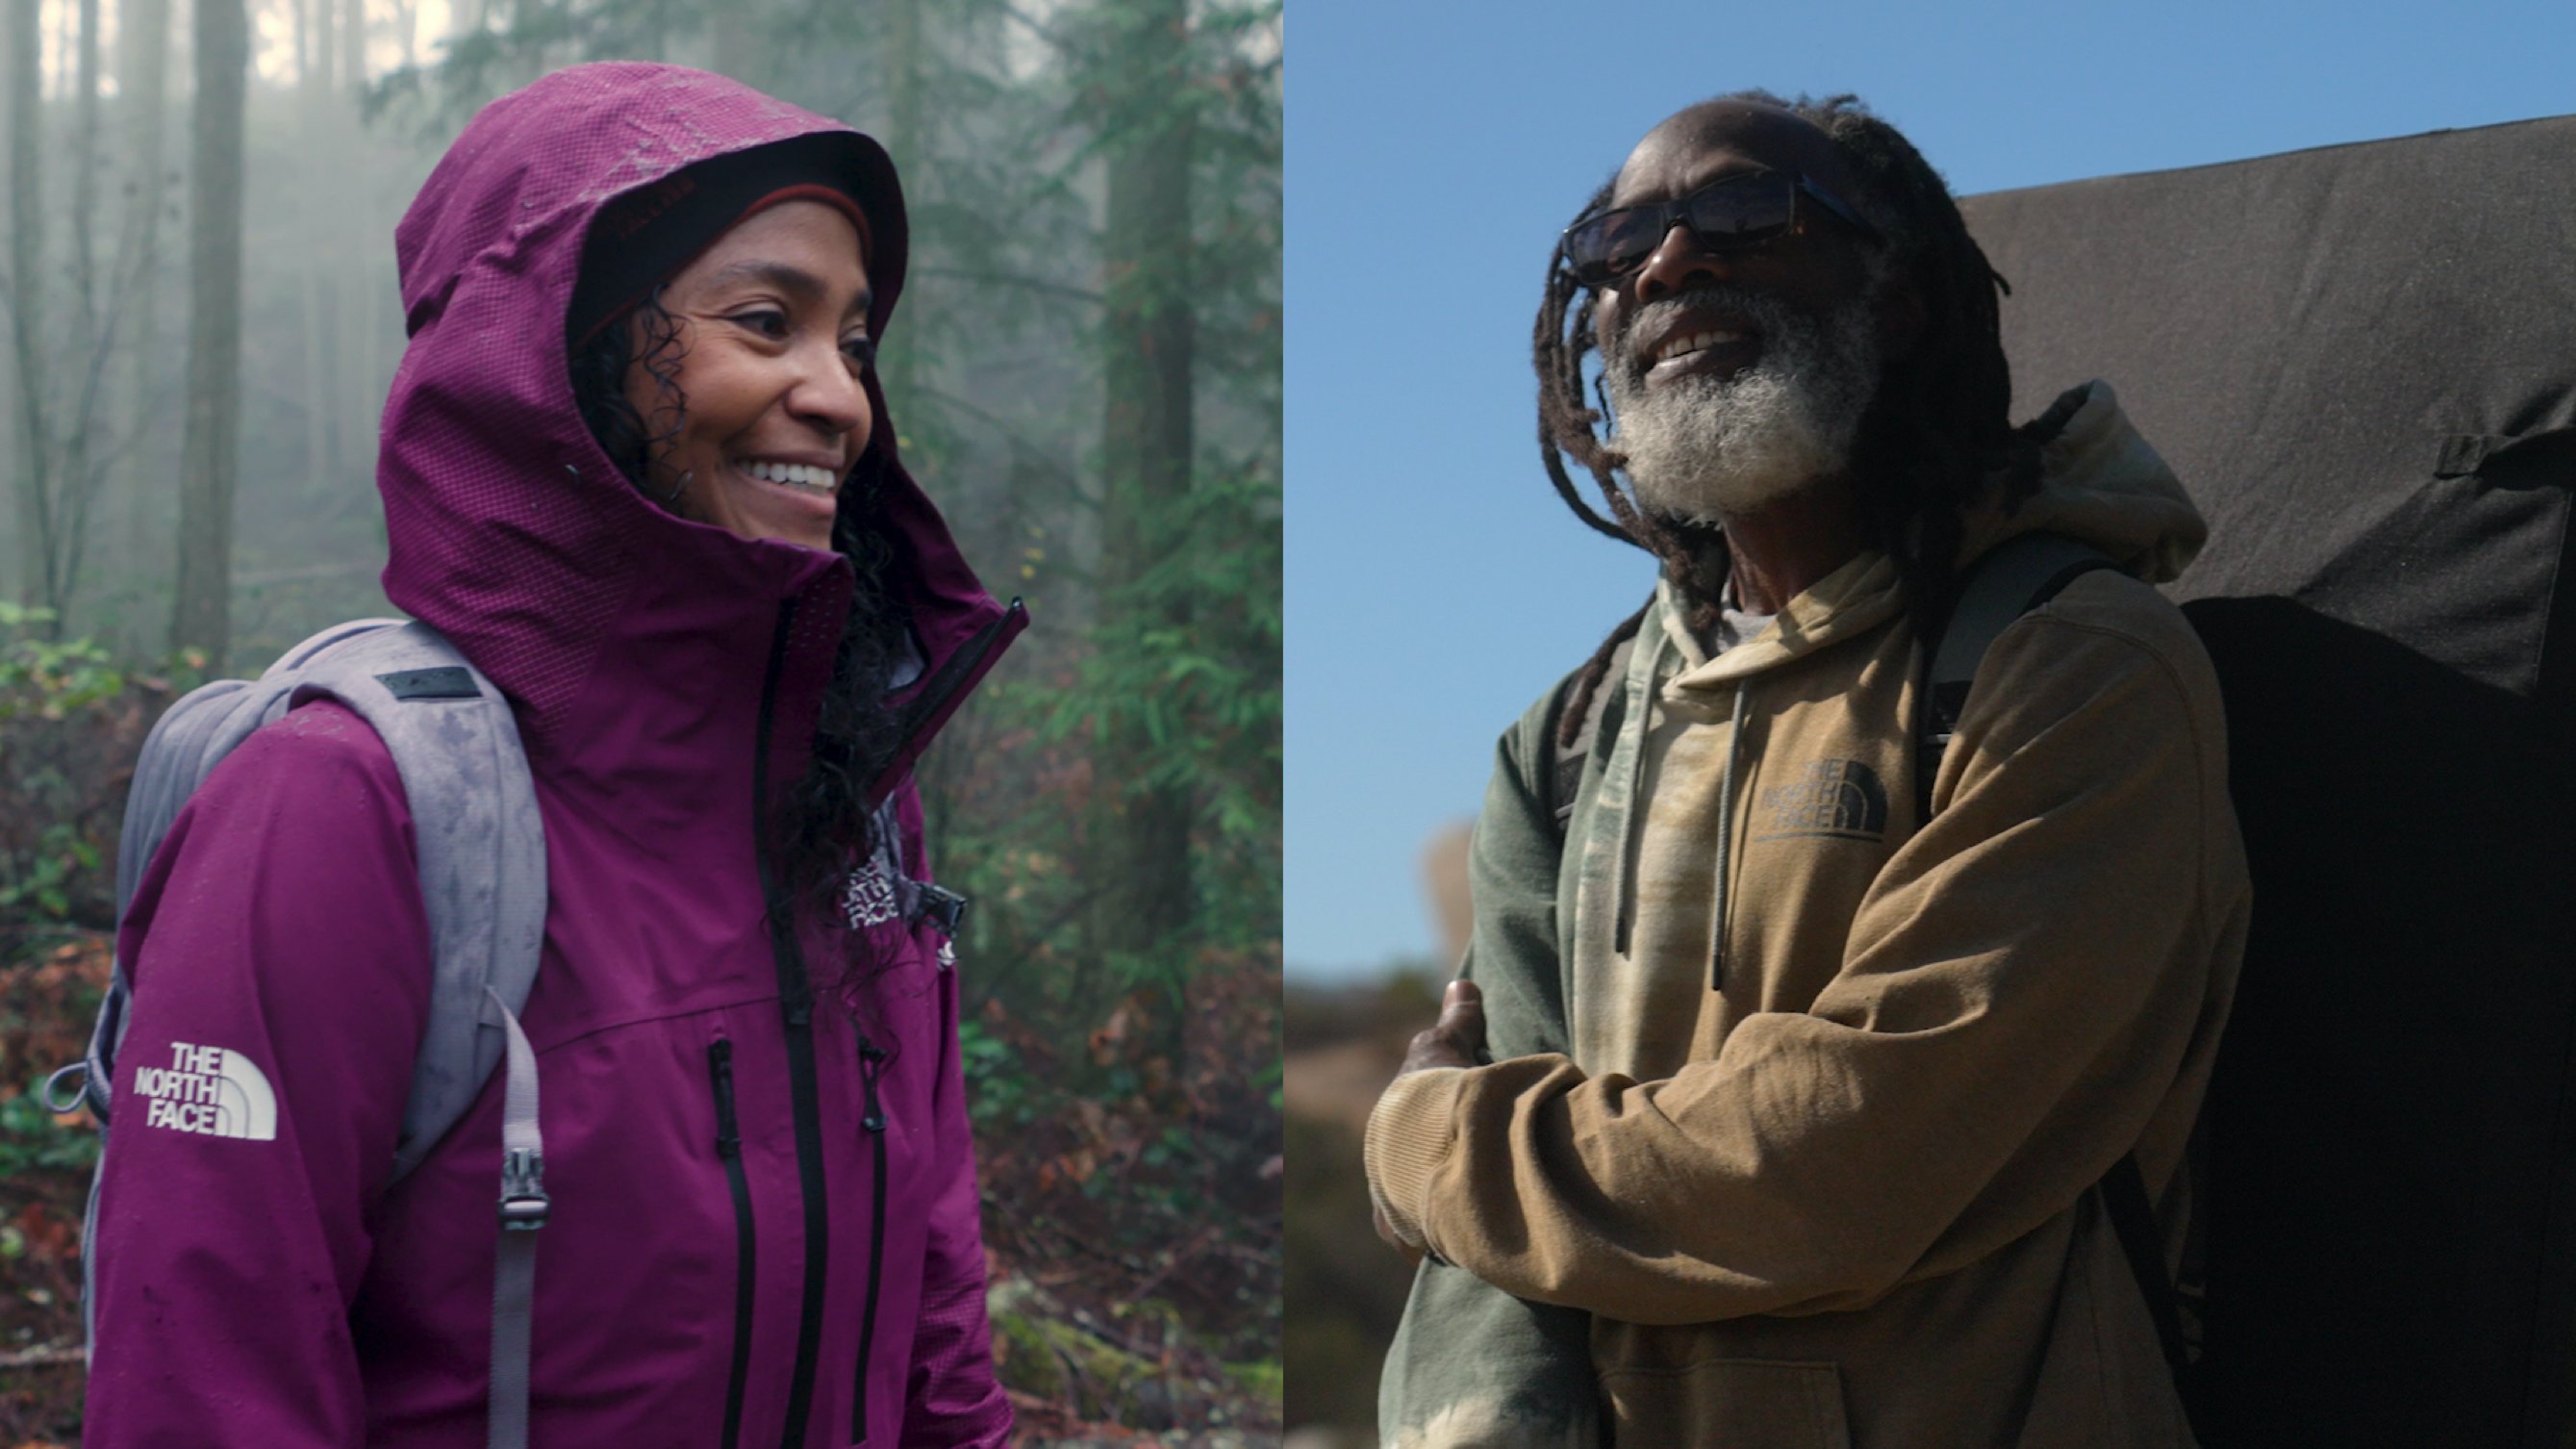 Sophia Danenberg and Phil Henderson share their perspectives on Black joy and exploration, including their expeditions to summit the highest peak in the world—Mount Everest.